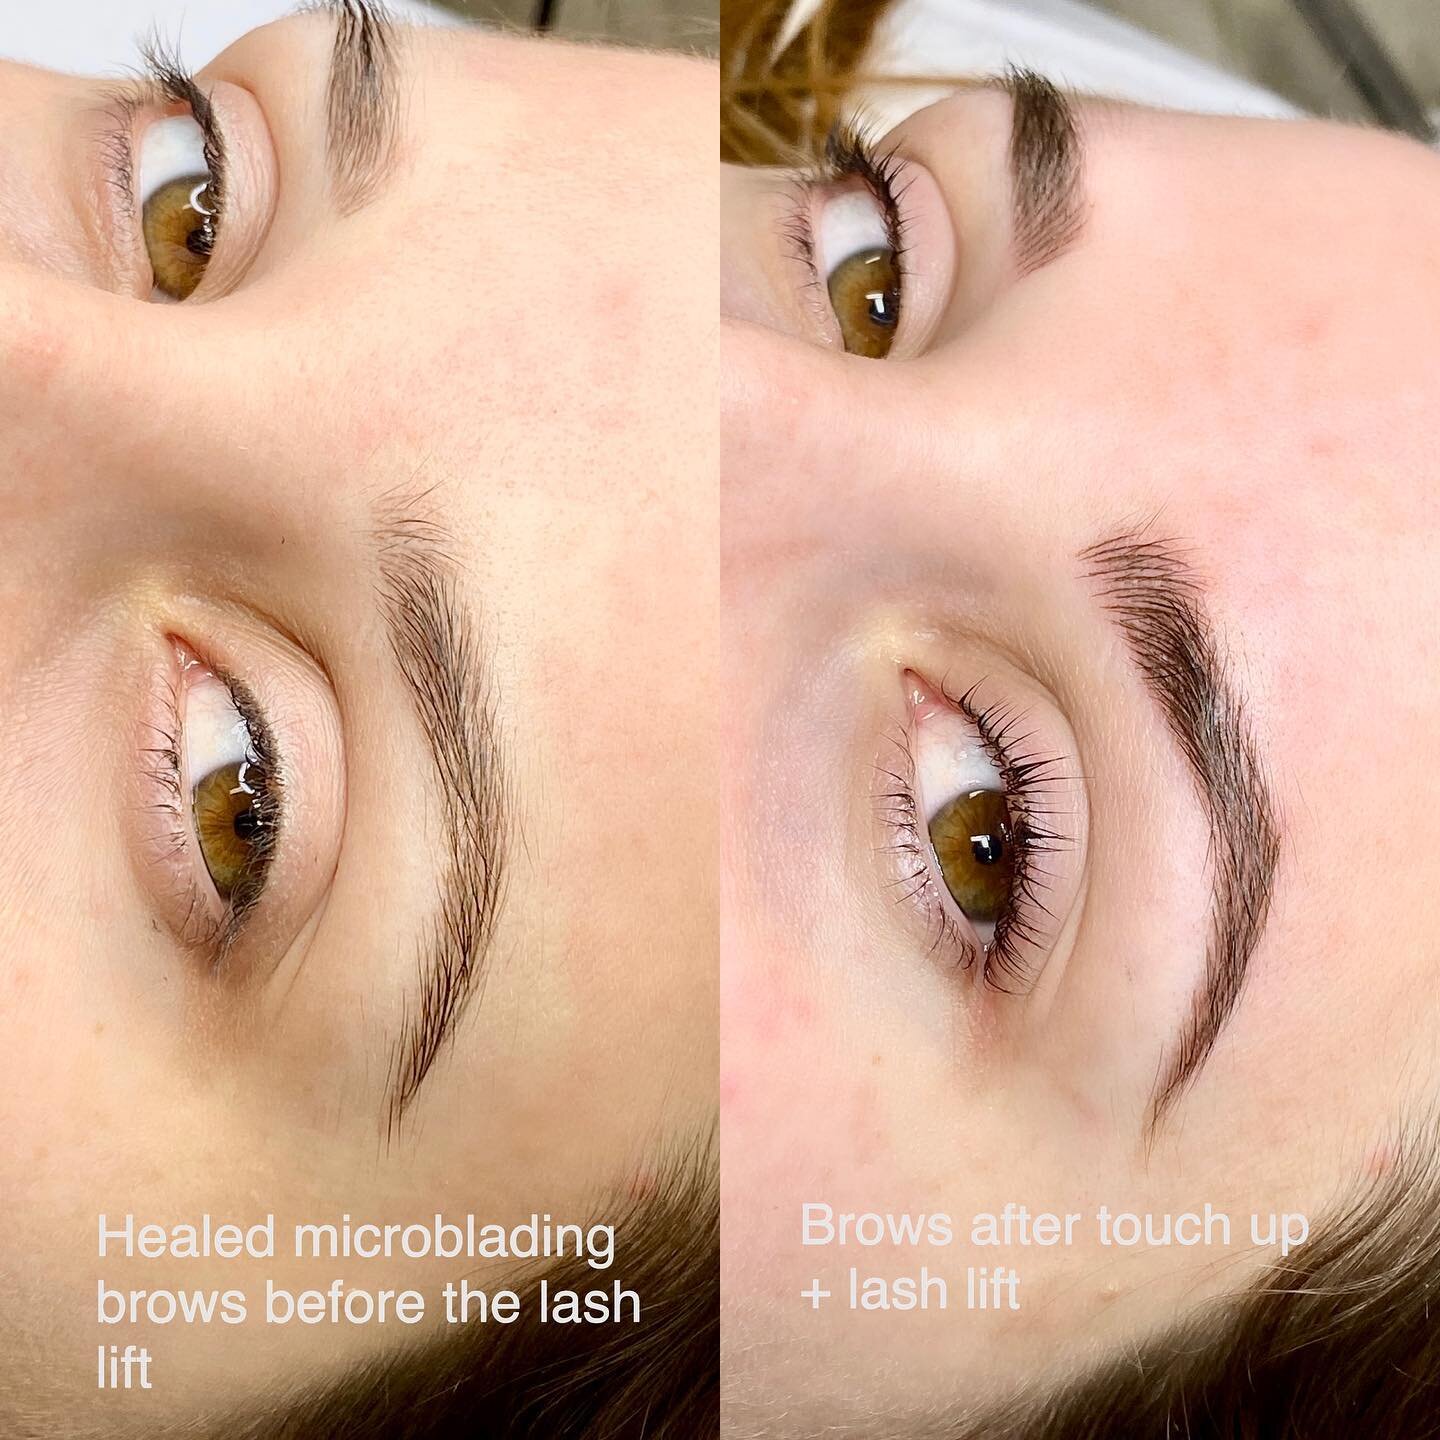 Microblading brows before and after touch up + before and after lash lift and tint #lashlift #lashlifting #lashliftandtint #naturallashes #nomorecurllashes #naturalbeauty #touchupbrows #microblading #pmubrows #microbladingbrows #lovebrows #loveeyebro